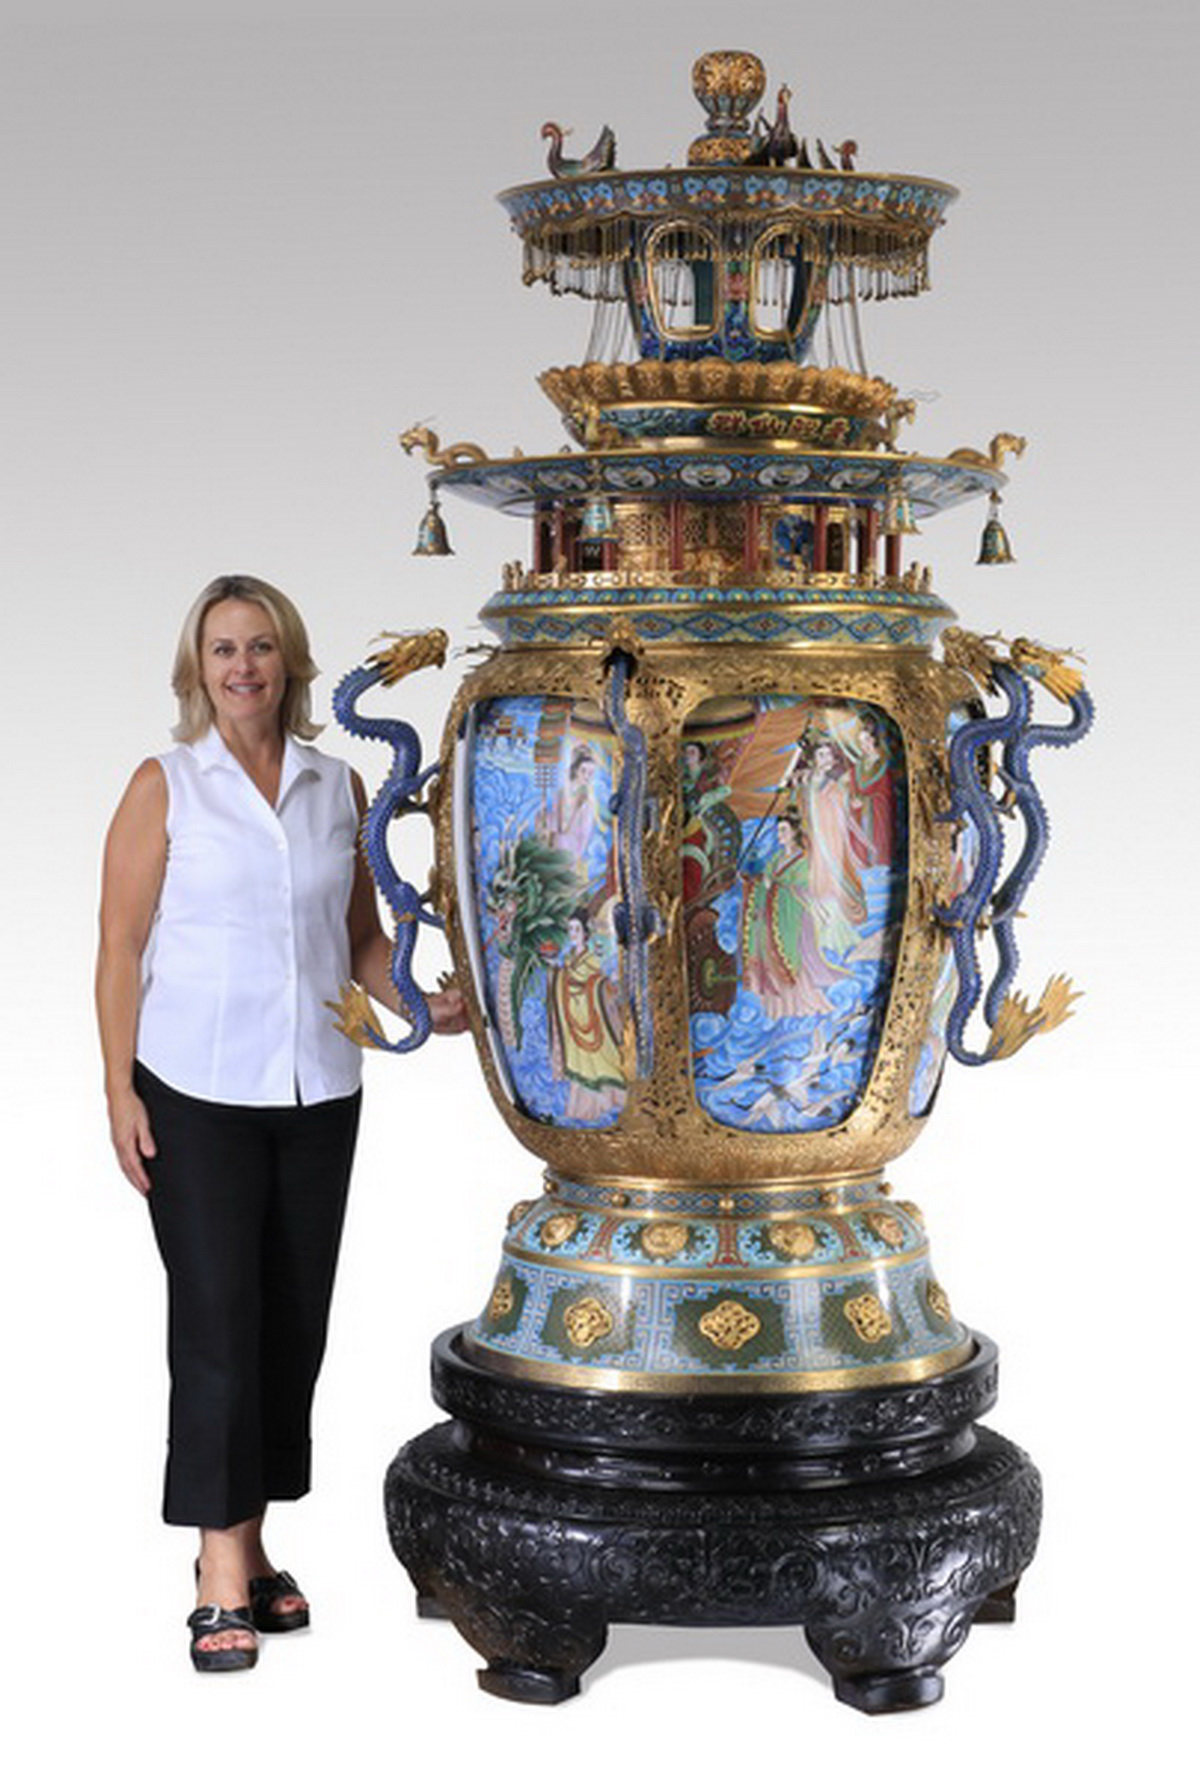 Finely detailed and palace-size Chinese enamel cloisonné and gilt metal censor, standing a staggering 96 inches tall. Great Gatsby’s Auction Gallery image